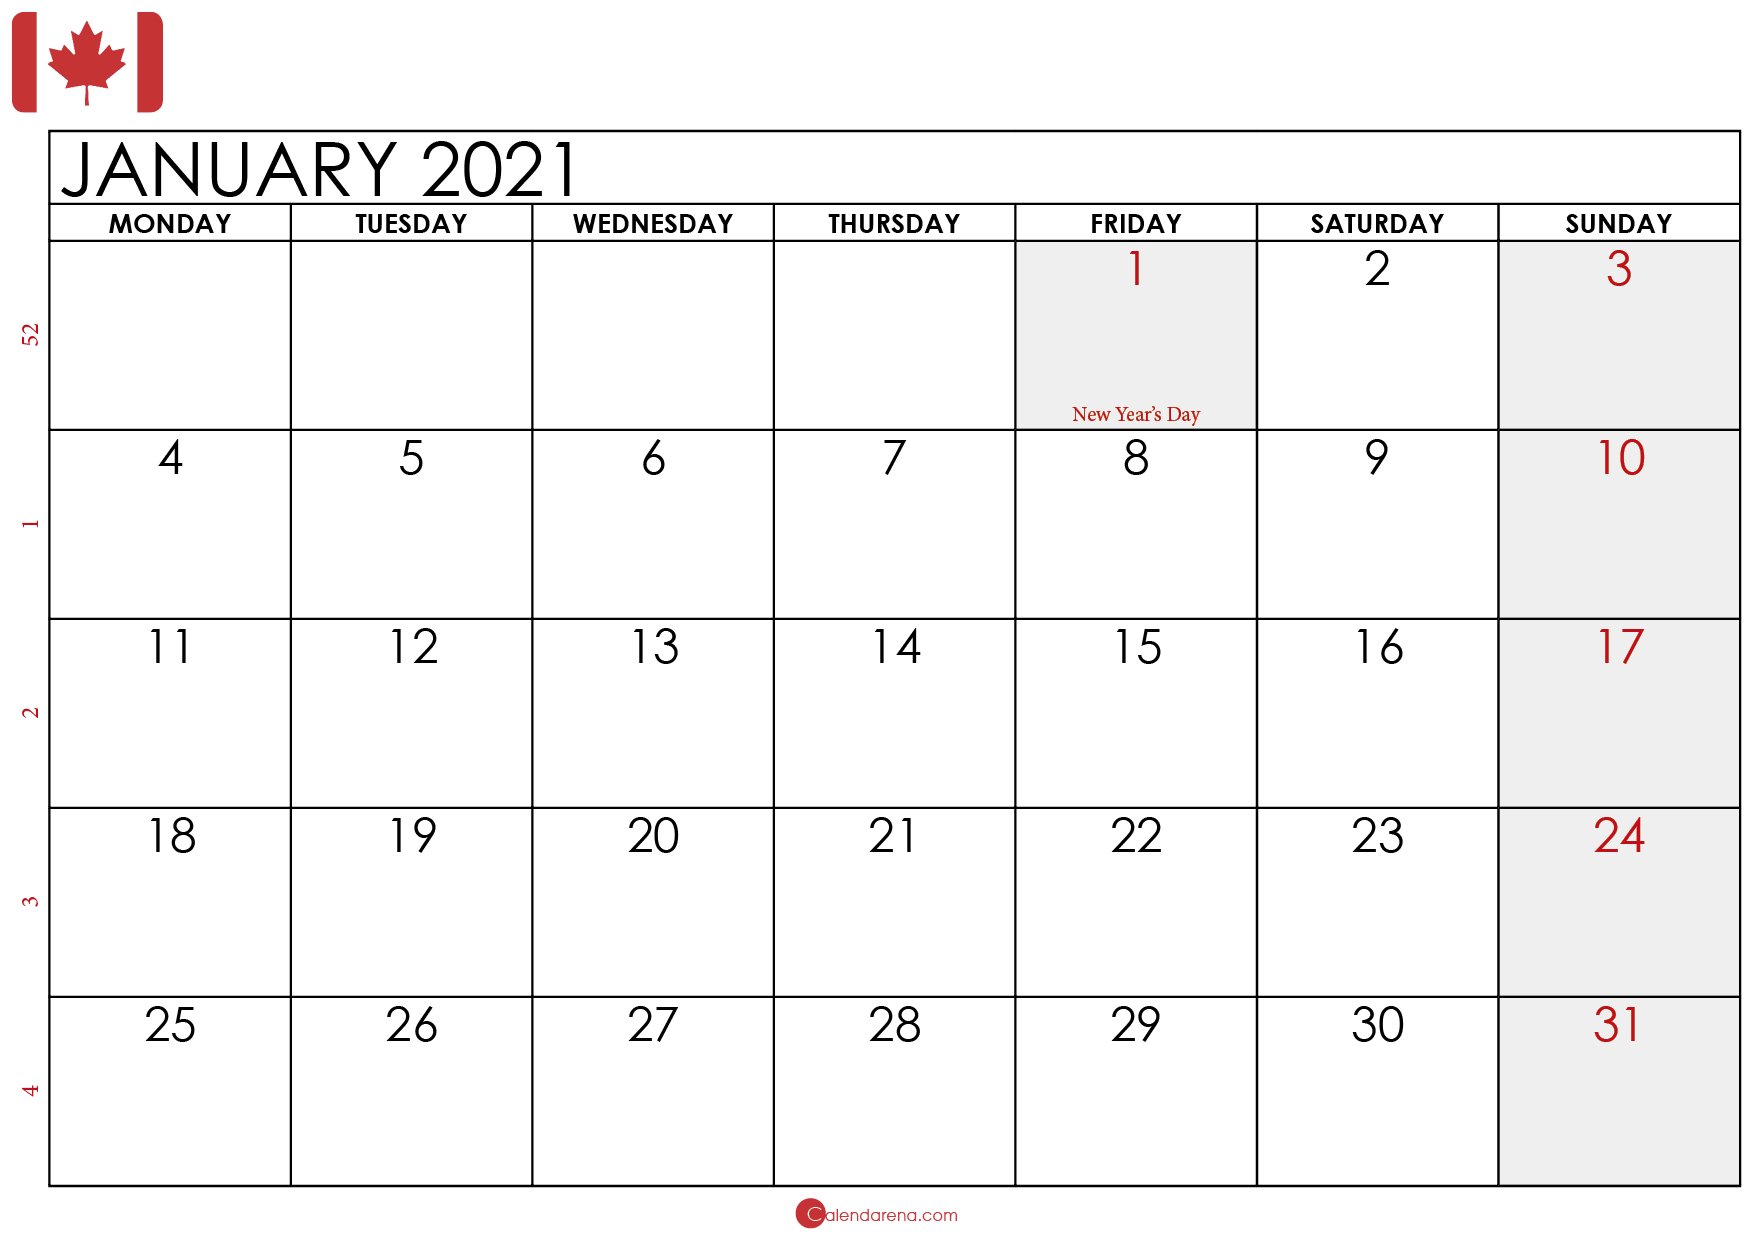 Download Free January 2021 Calendar Canada???? With Weeks December 2021 Calendar With Holidays Canada